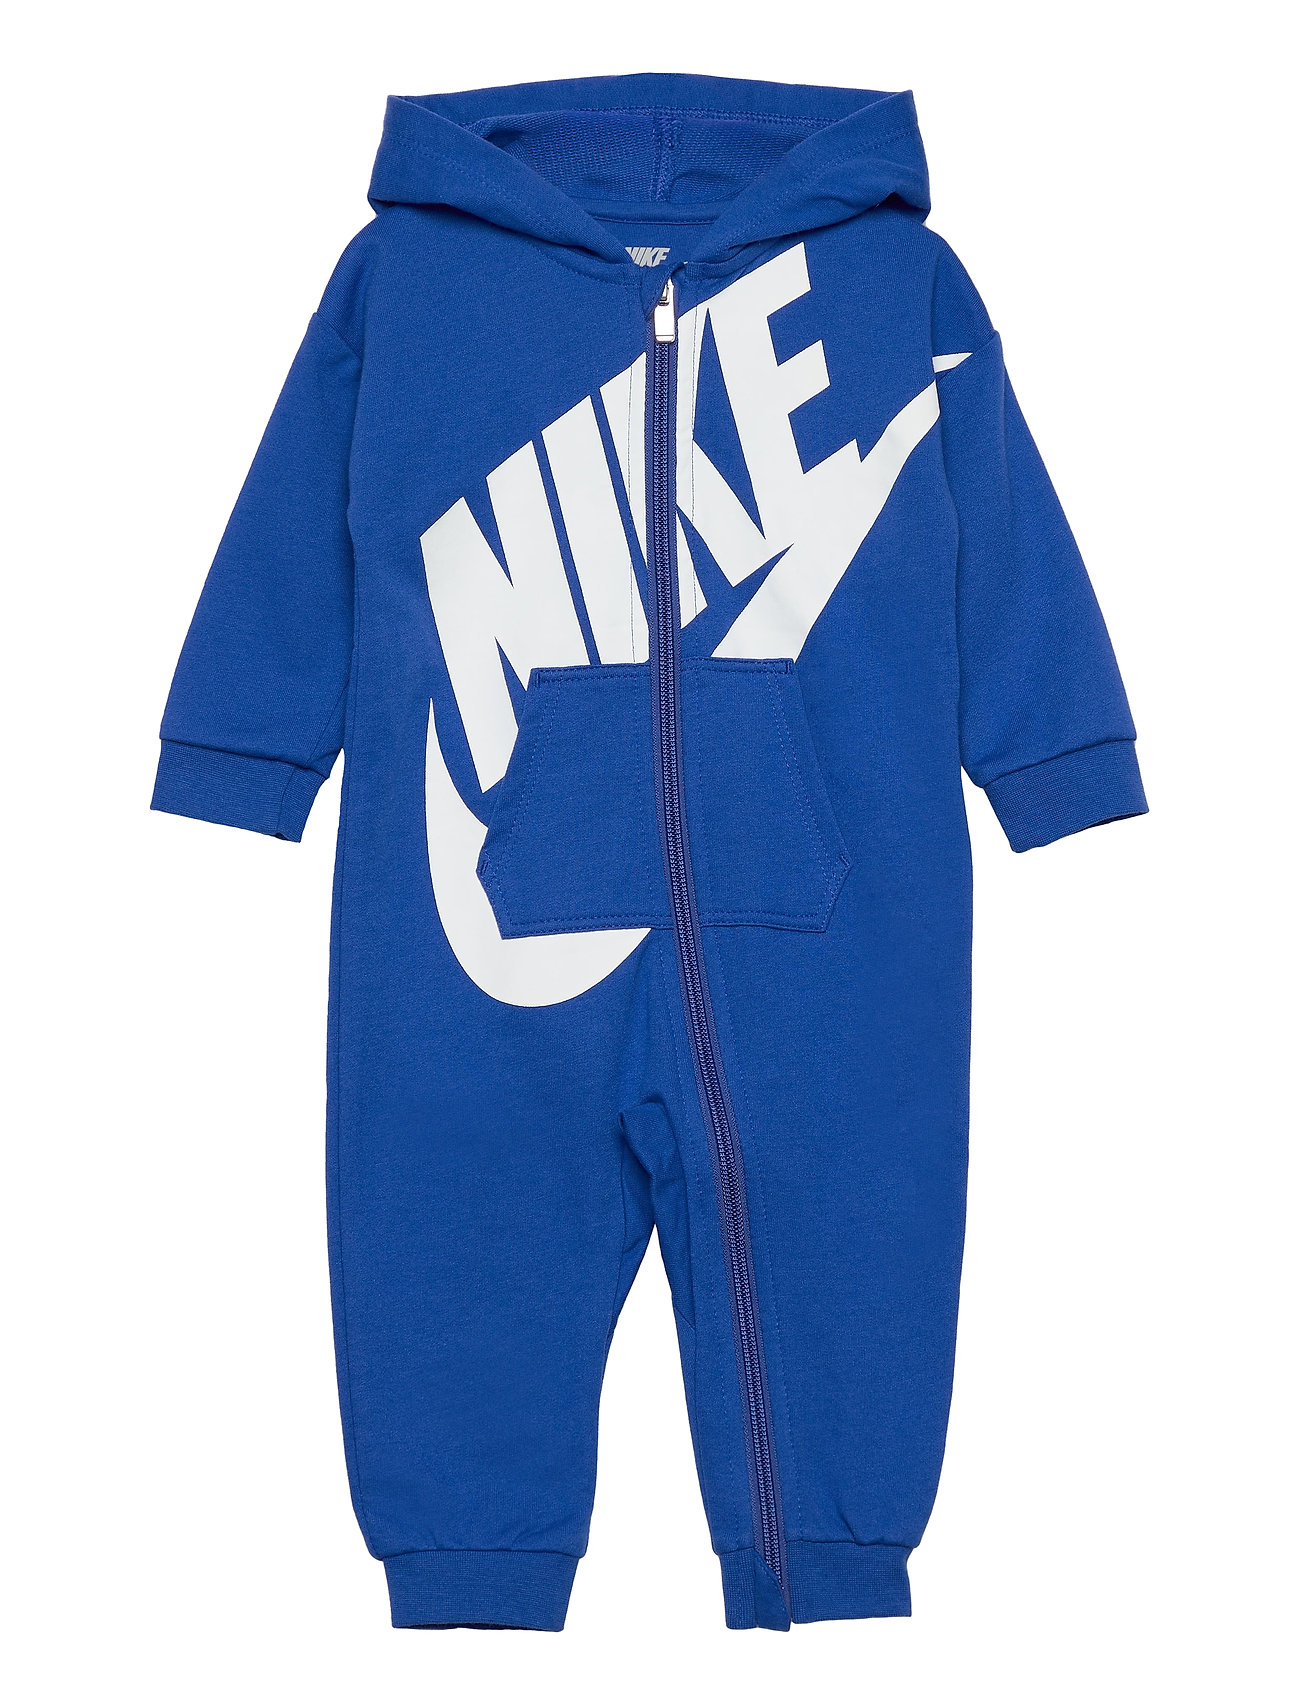 Nike Nkn All Booztlet Coverall einkaufen Day strampler – bei Play –